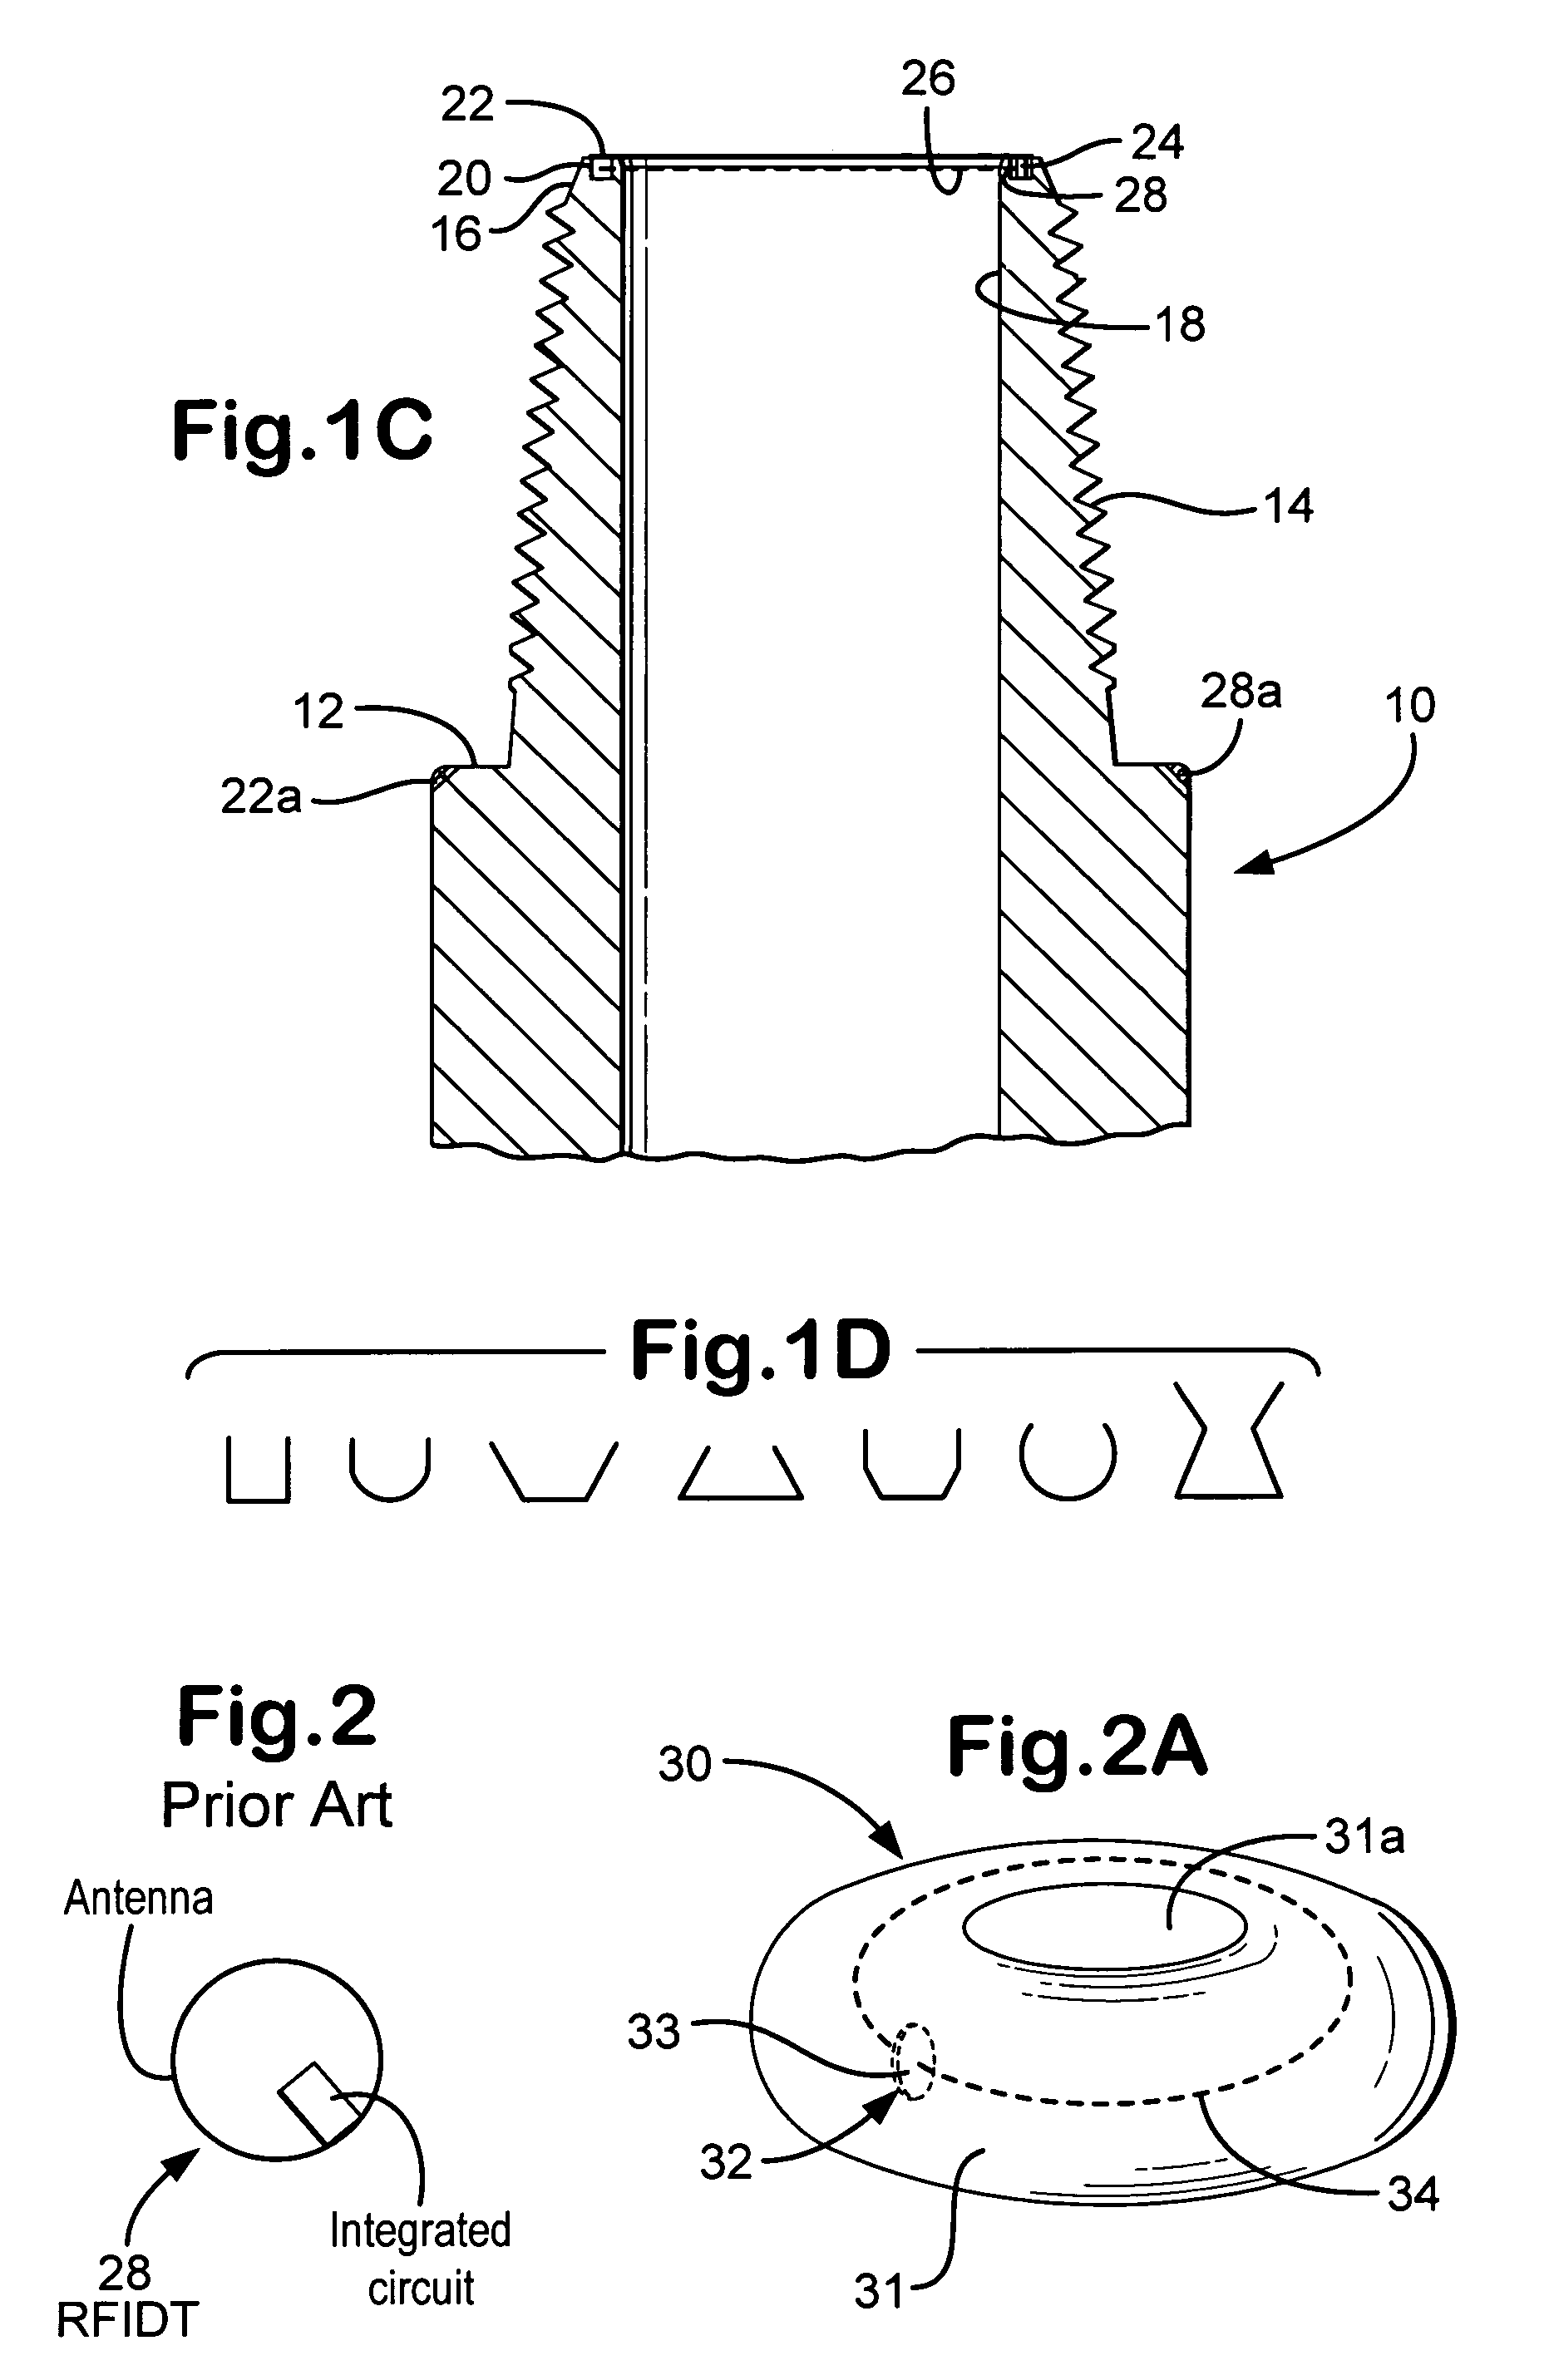 Apparatus identification systems and methods